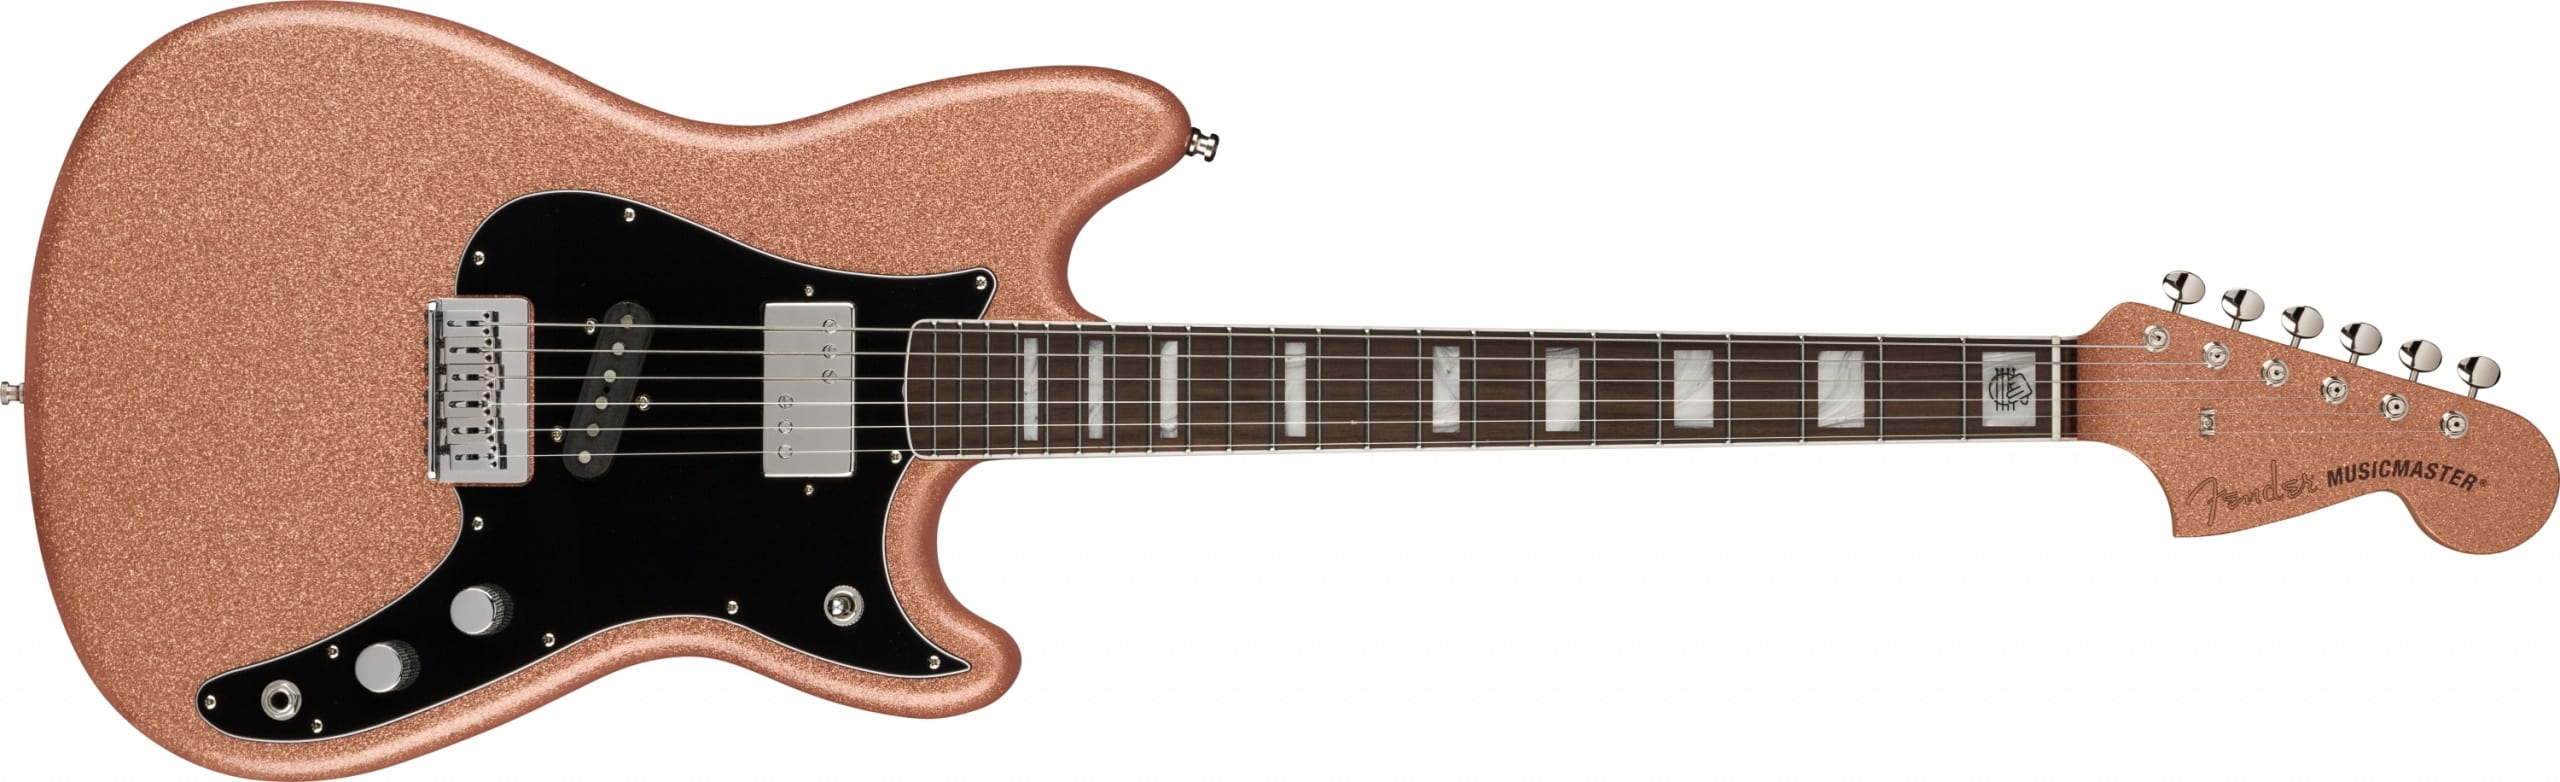 Fender Play Foundation Musicaster in Copper Sparkle by Dennis Galuszka